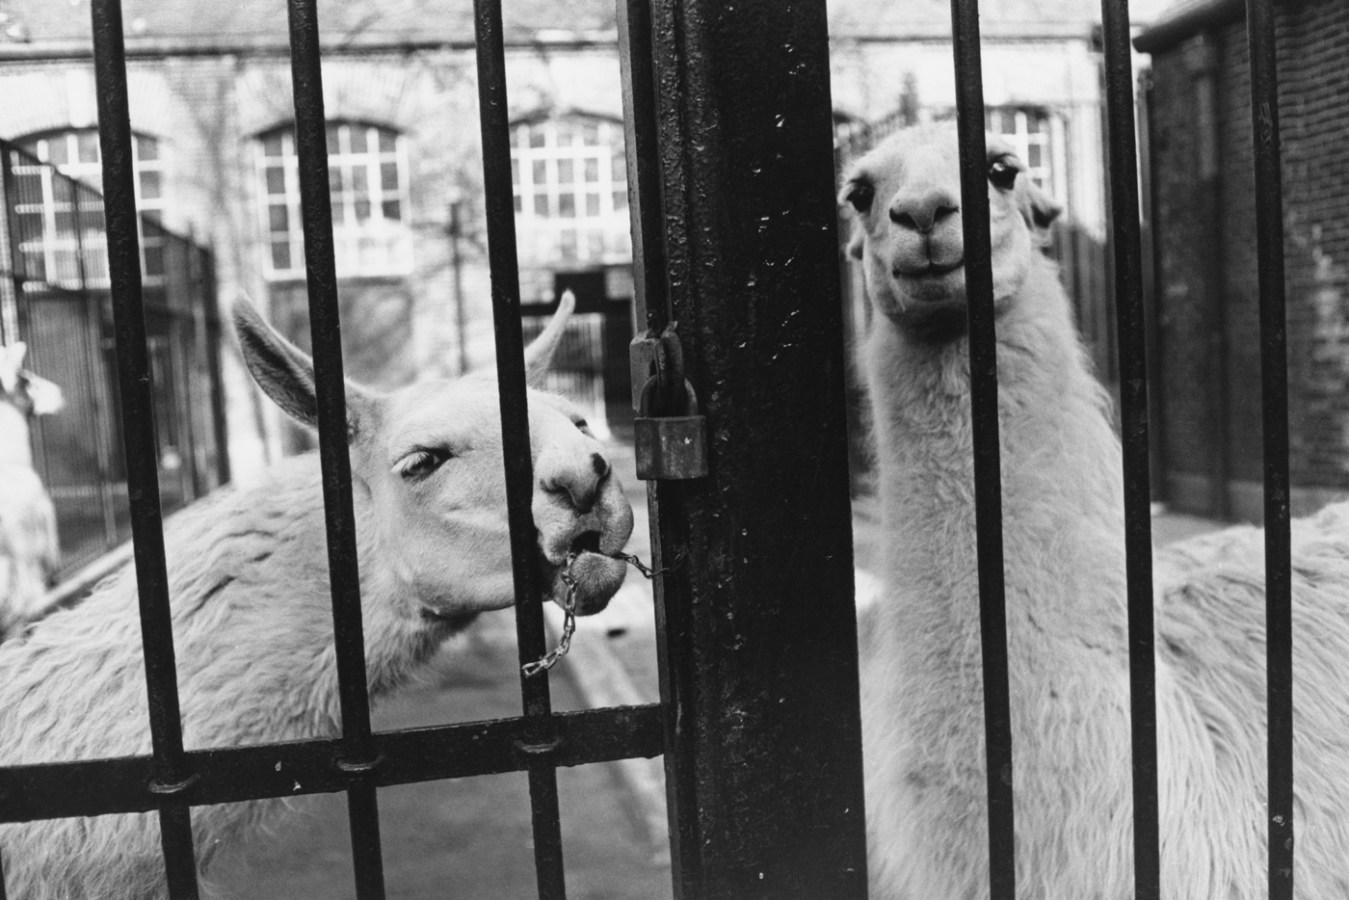 Black-and-white photograph of two llamas behind a locked iron gate